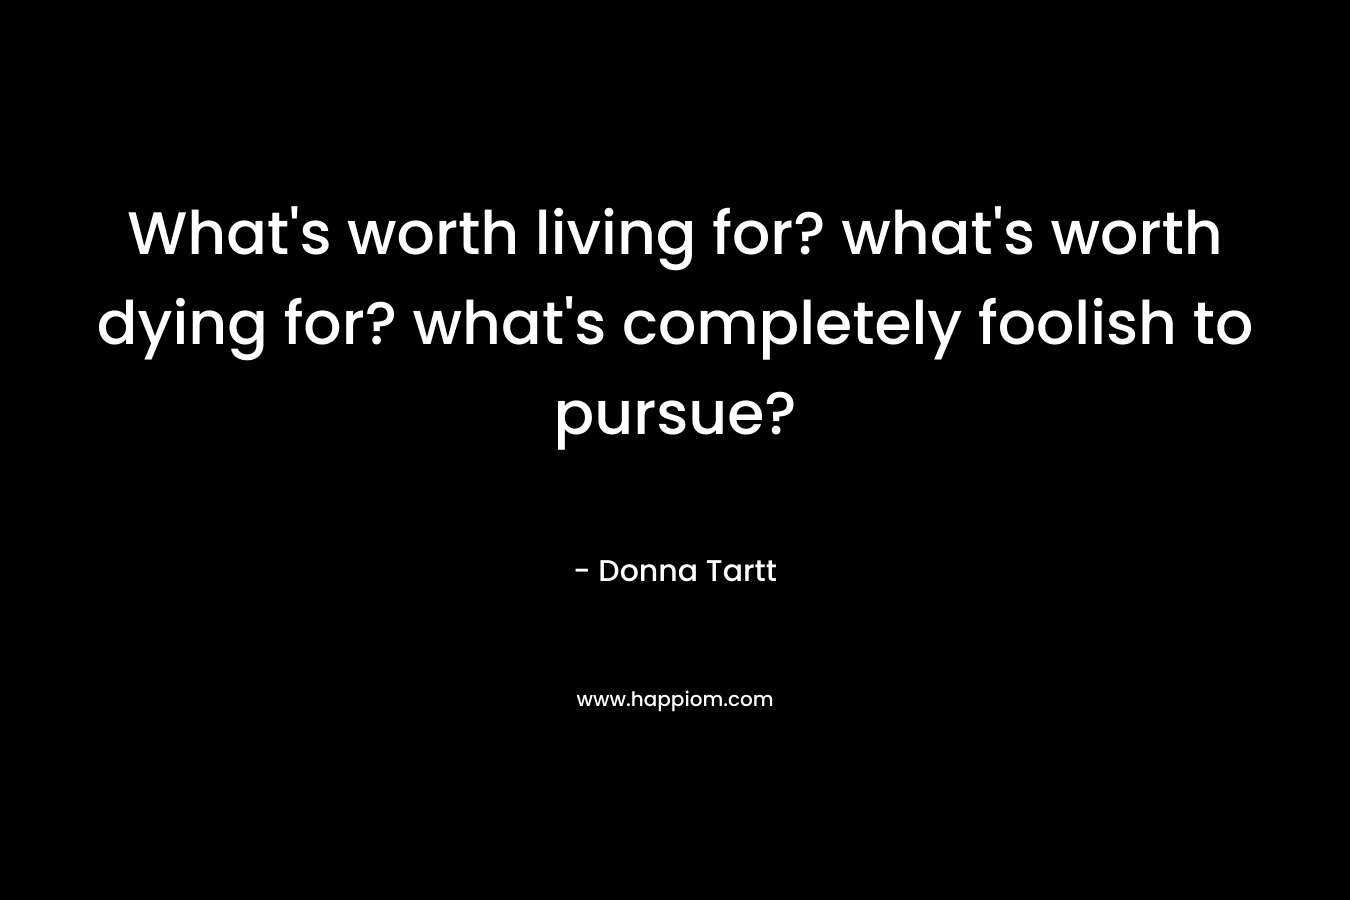 What's worth living for? what's worth dying for? what's completely foolish to pursue?